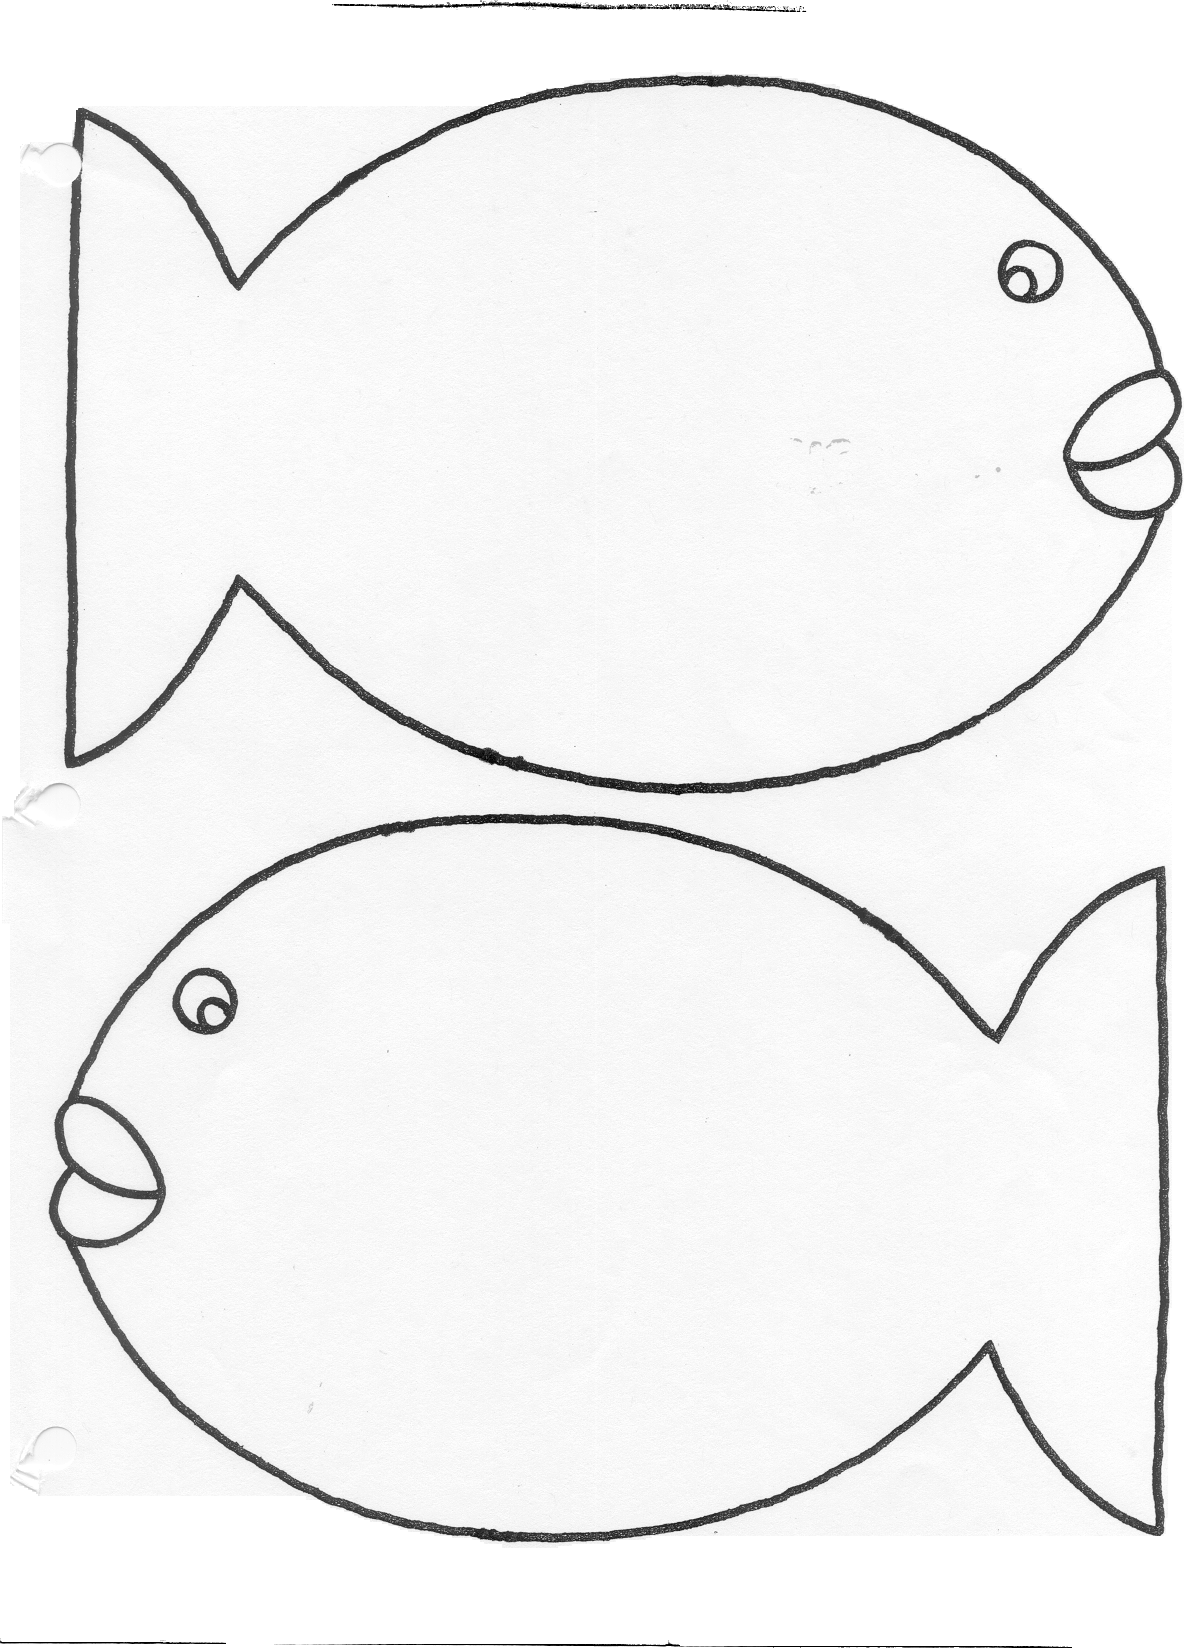 blank-fish-templates-clipart-best